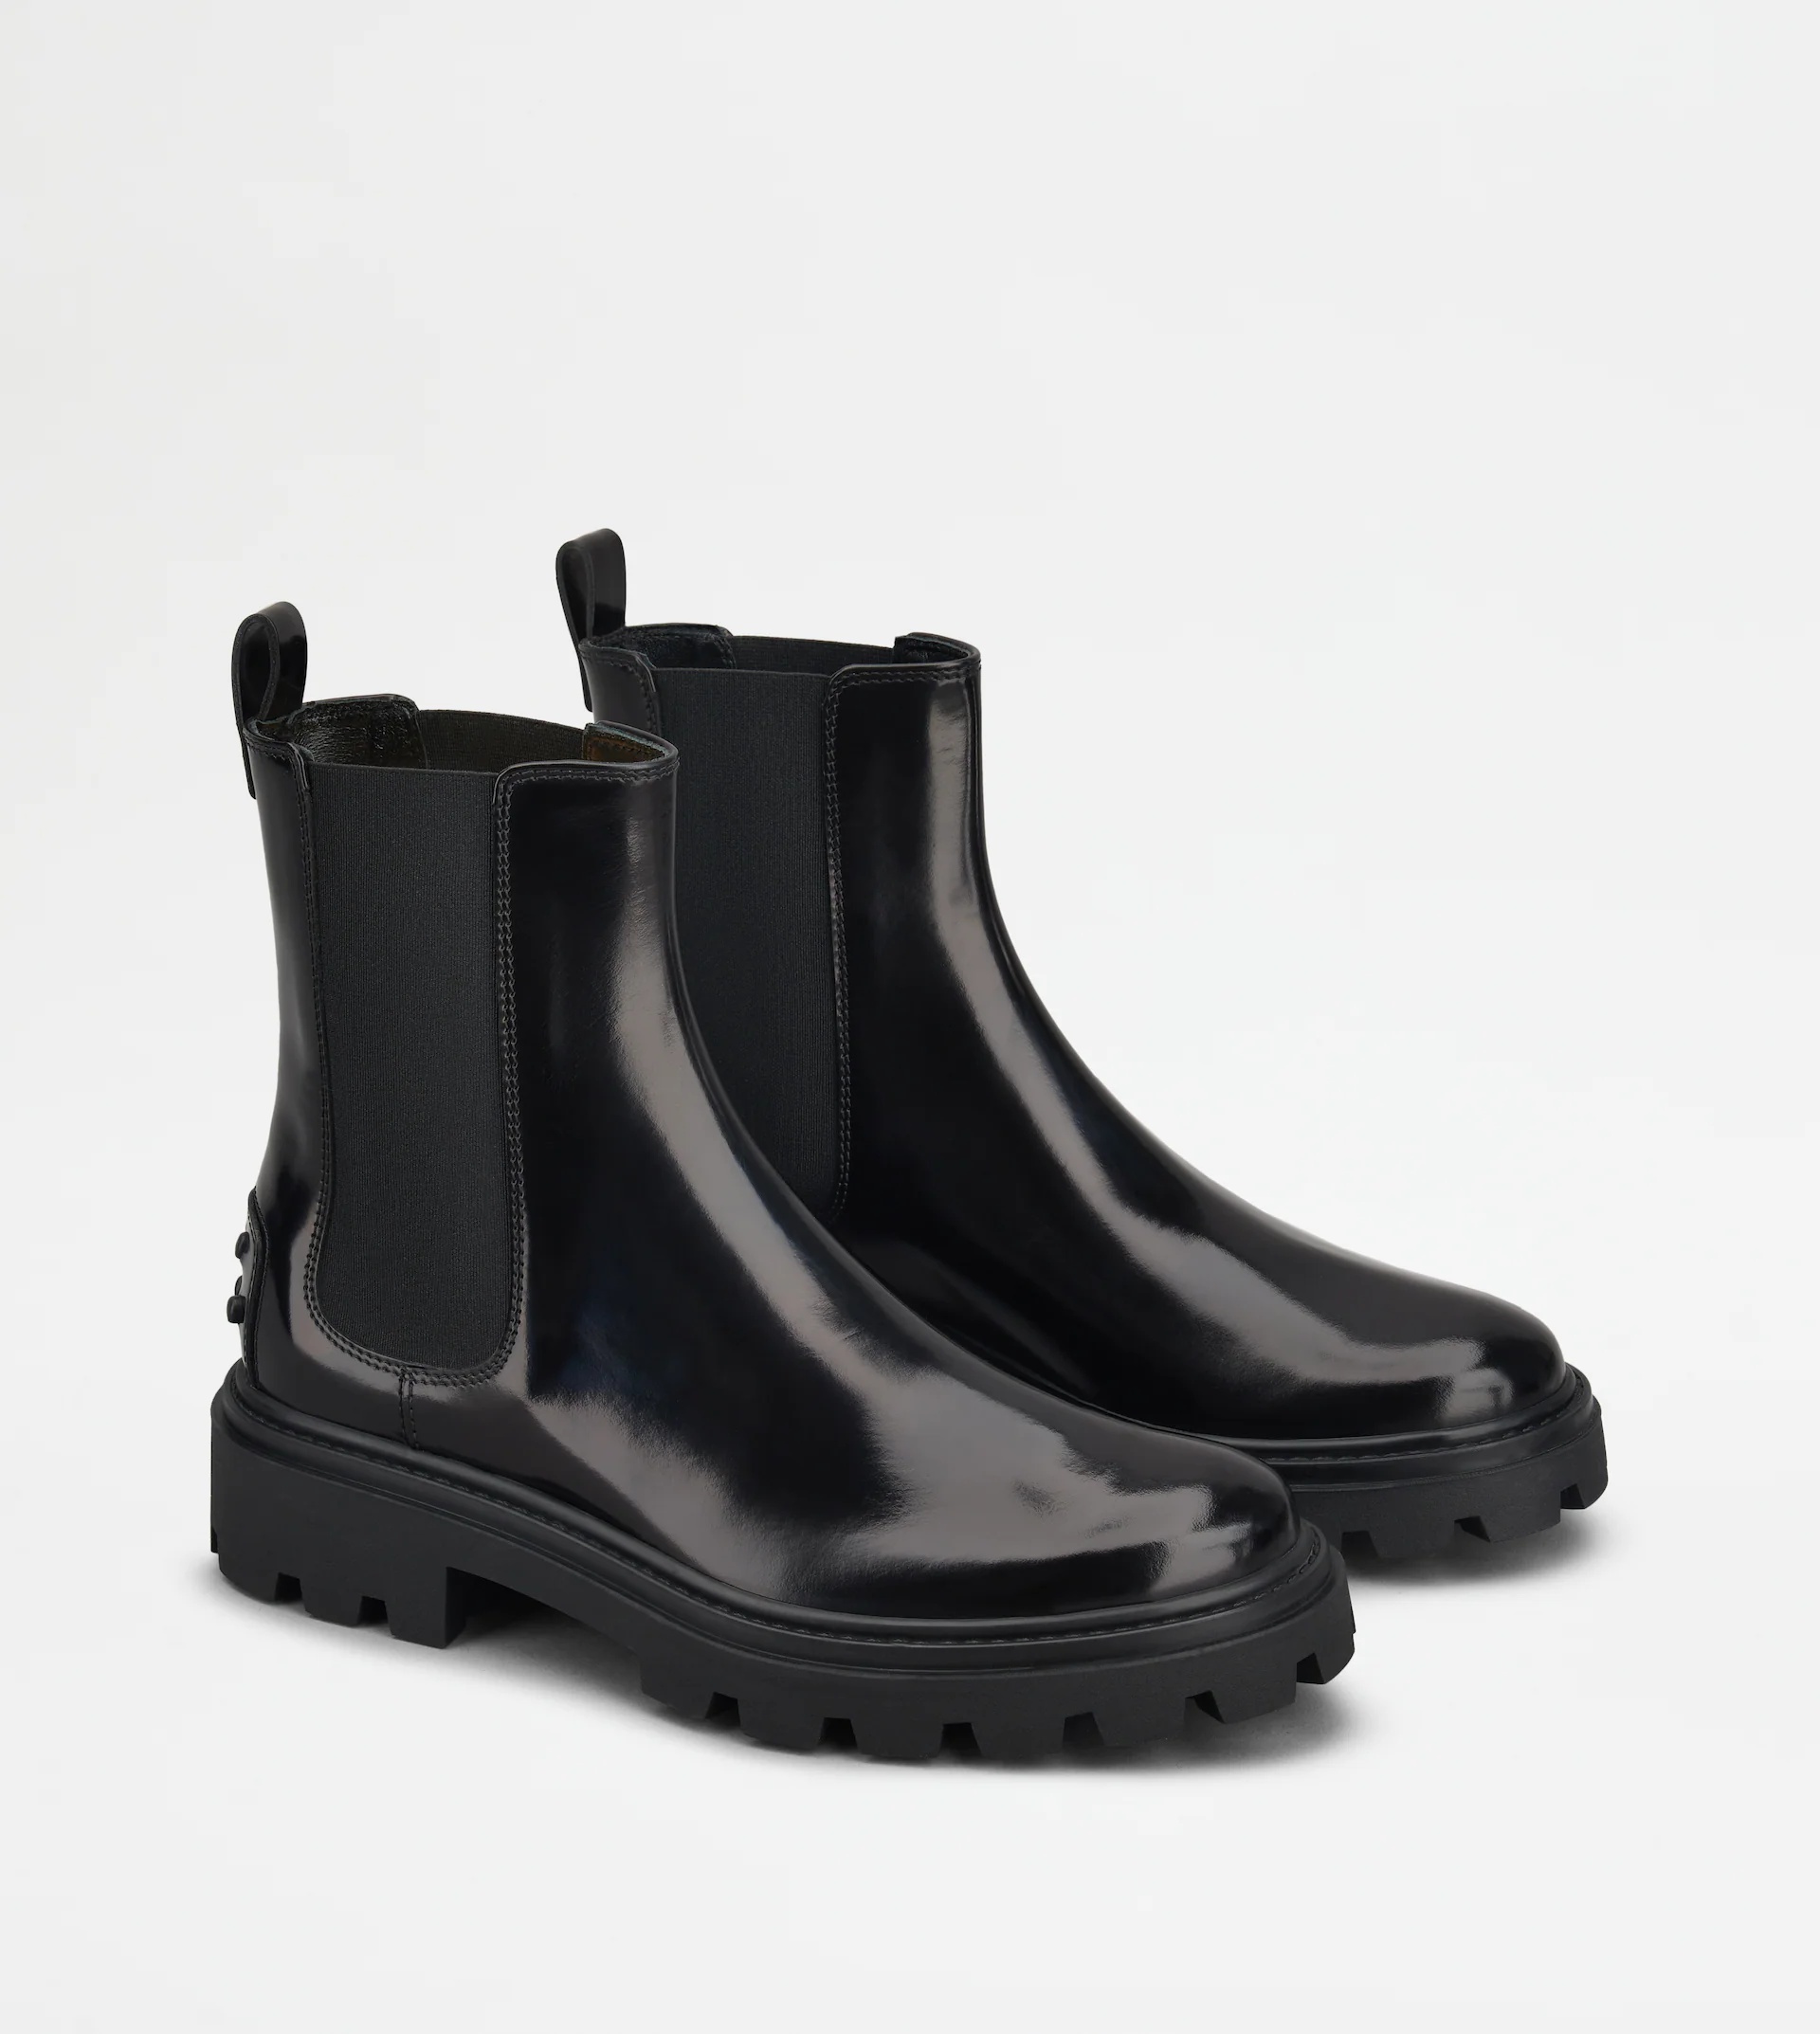 TOD'S CHELSEA BOOTS IN LEATHER - BLACK - 4